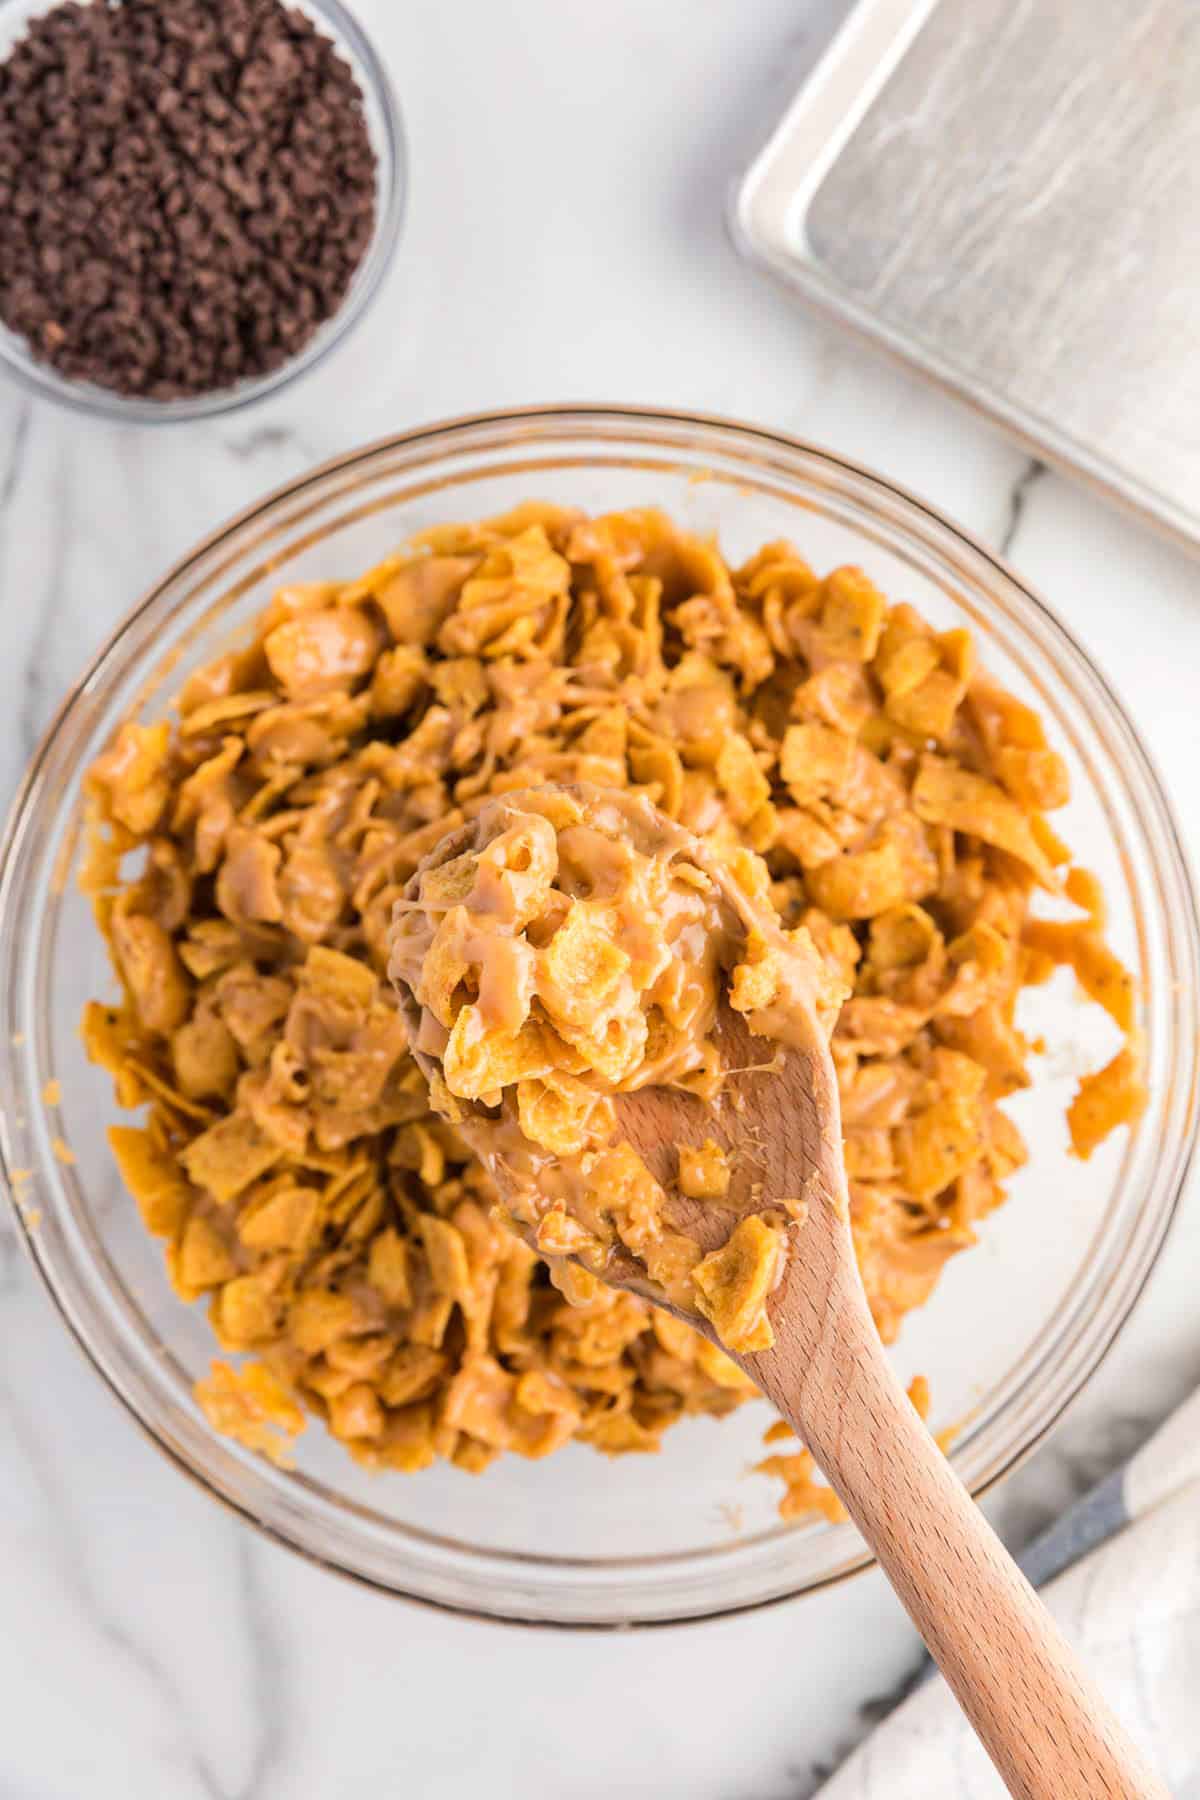 Mixing frito and peanut butter sauce in bowl